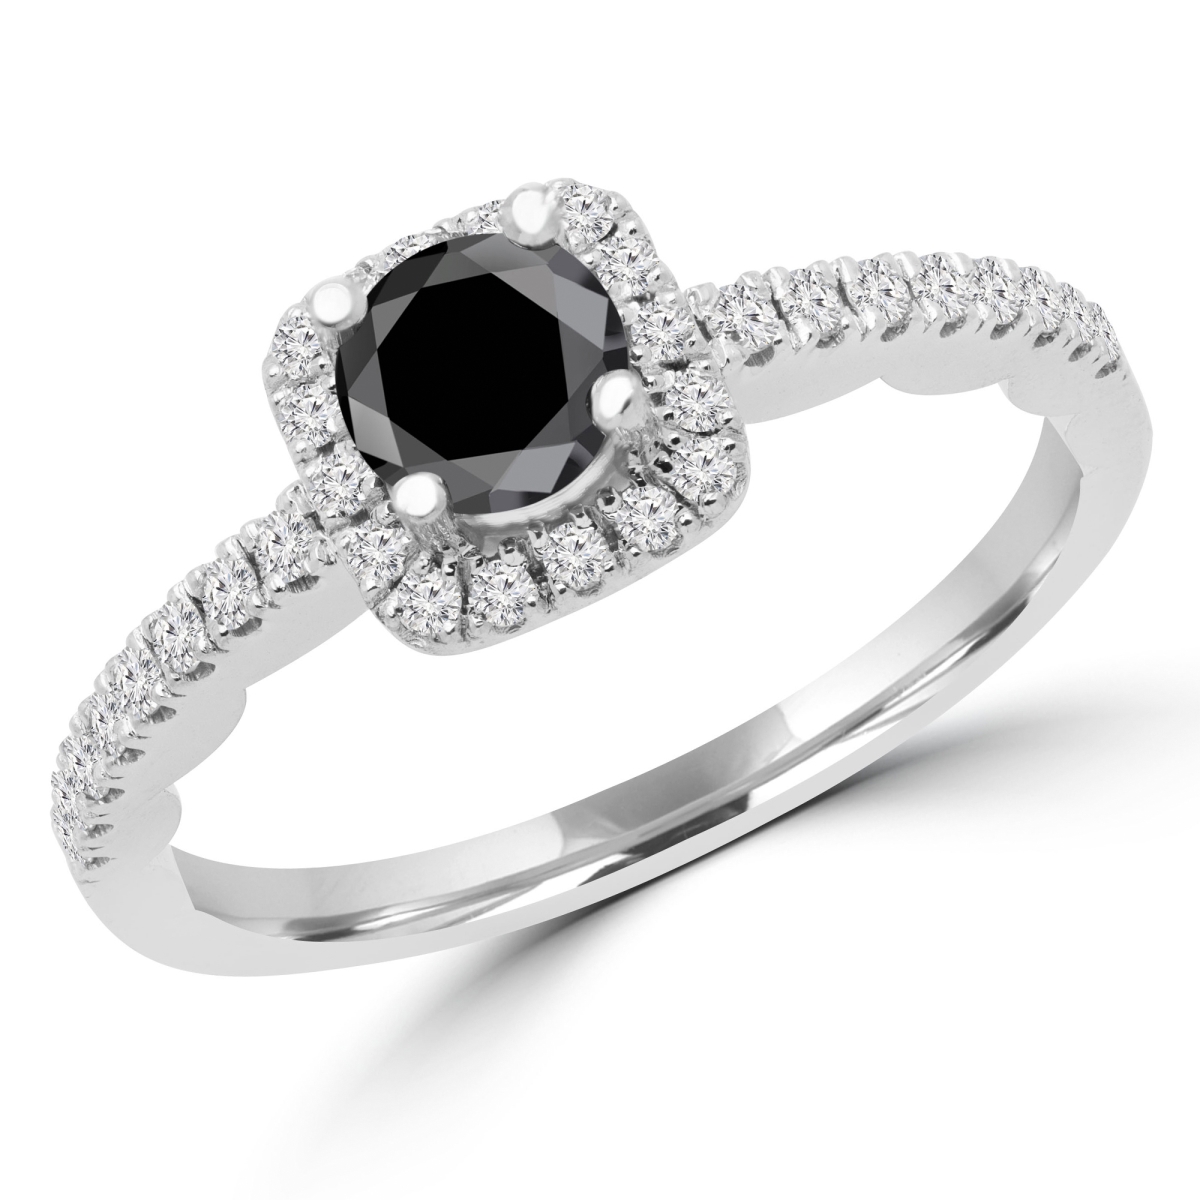 Picture of Majesty Diamonds MD170109 0.66 CTW Round BlacK Diamond Halo Engagement Ring in 14K